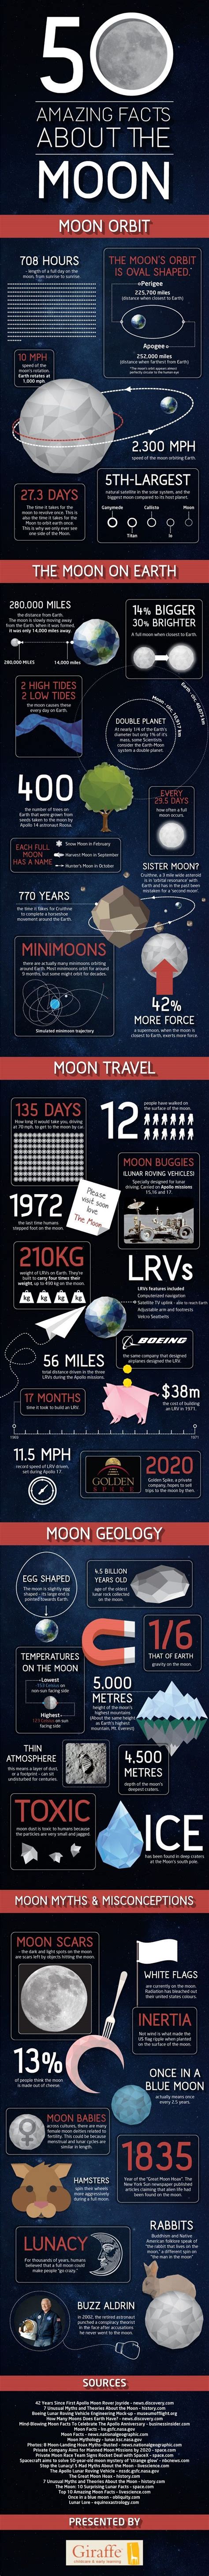 50 Amazing Facts About The Moon Infographic Space Science Fun